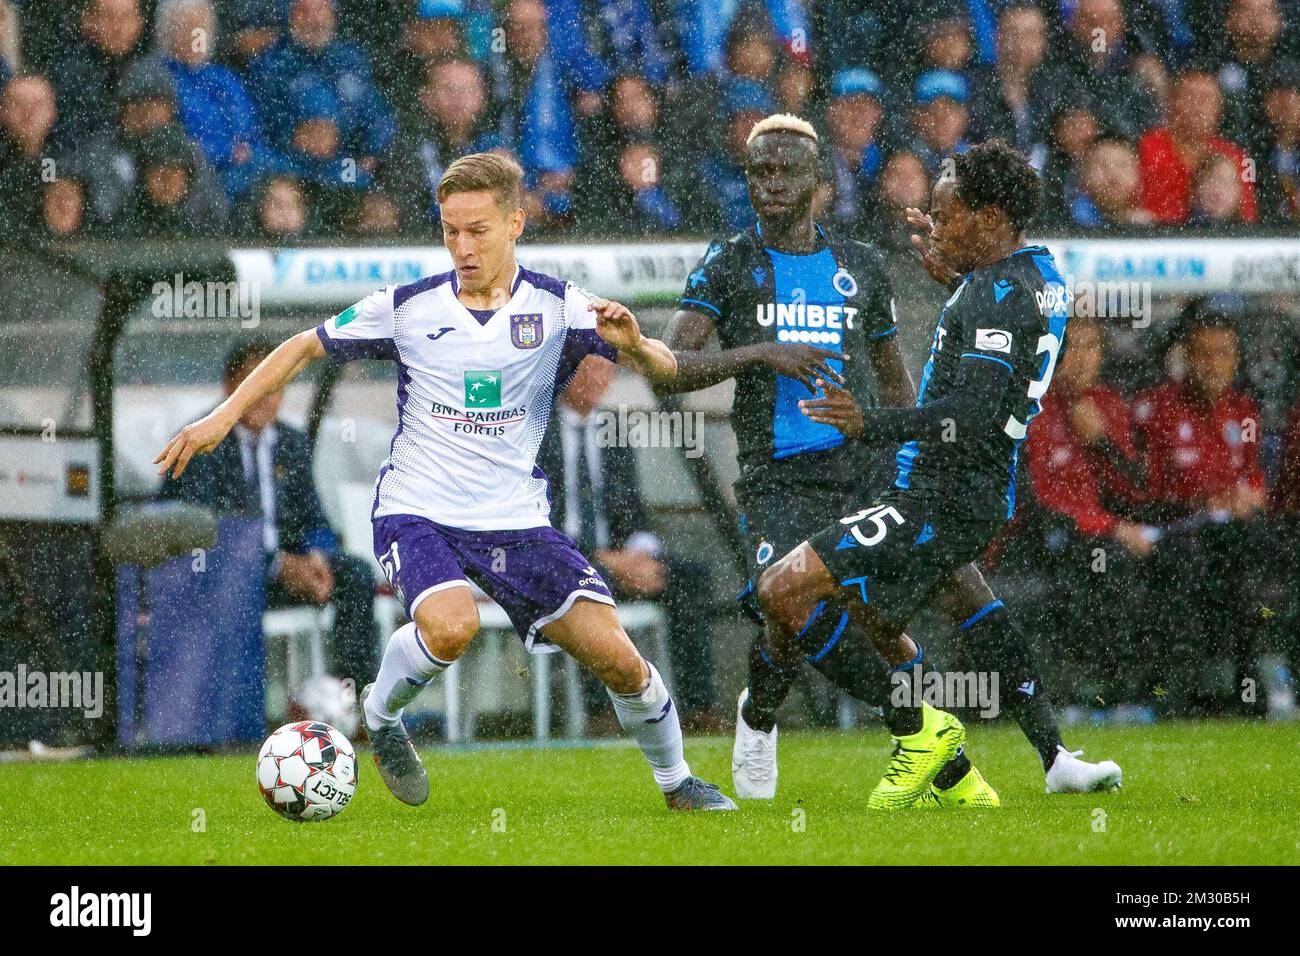 Club's Percy Tau and Anderlecht's Derrick Luckassen fight for the